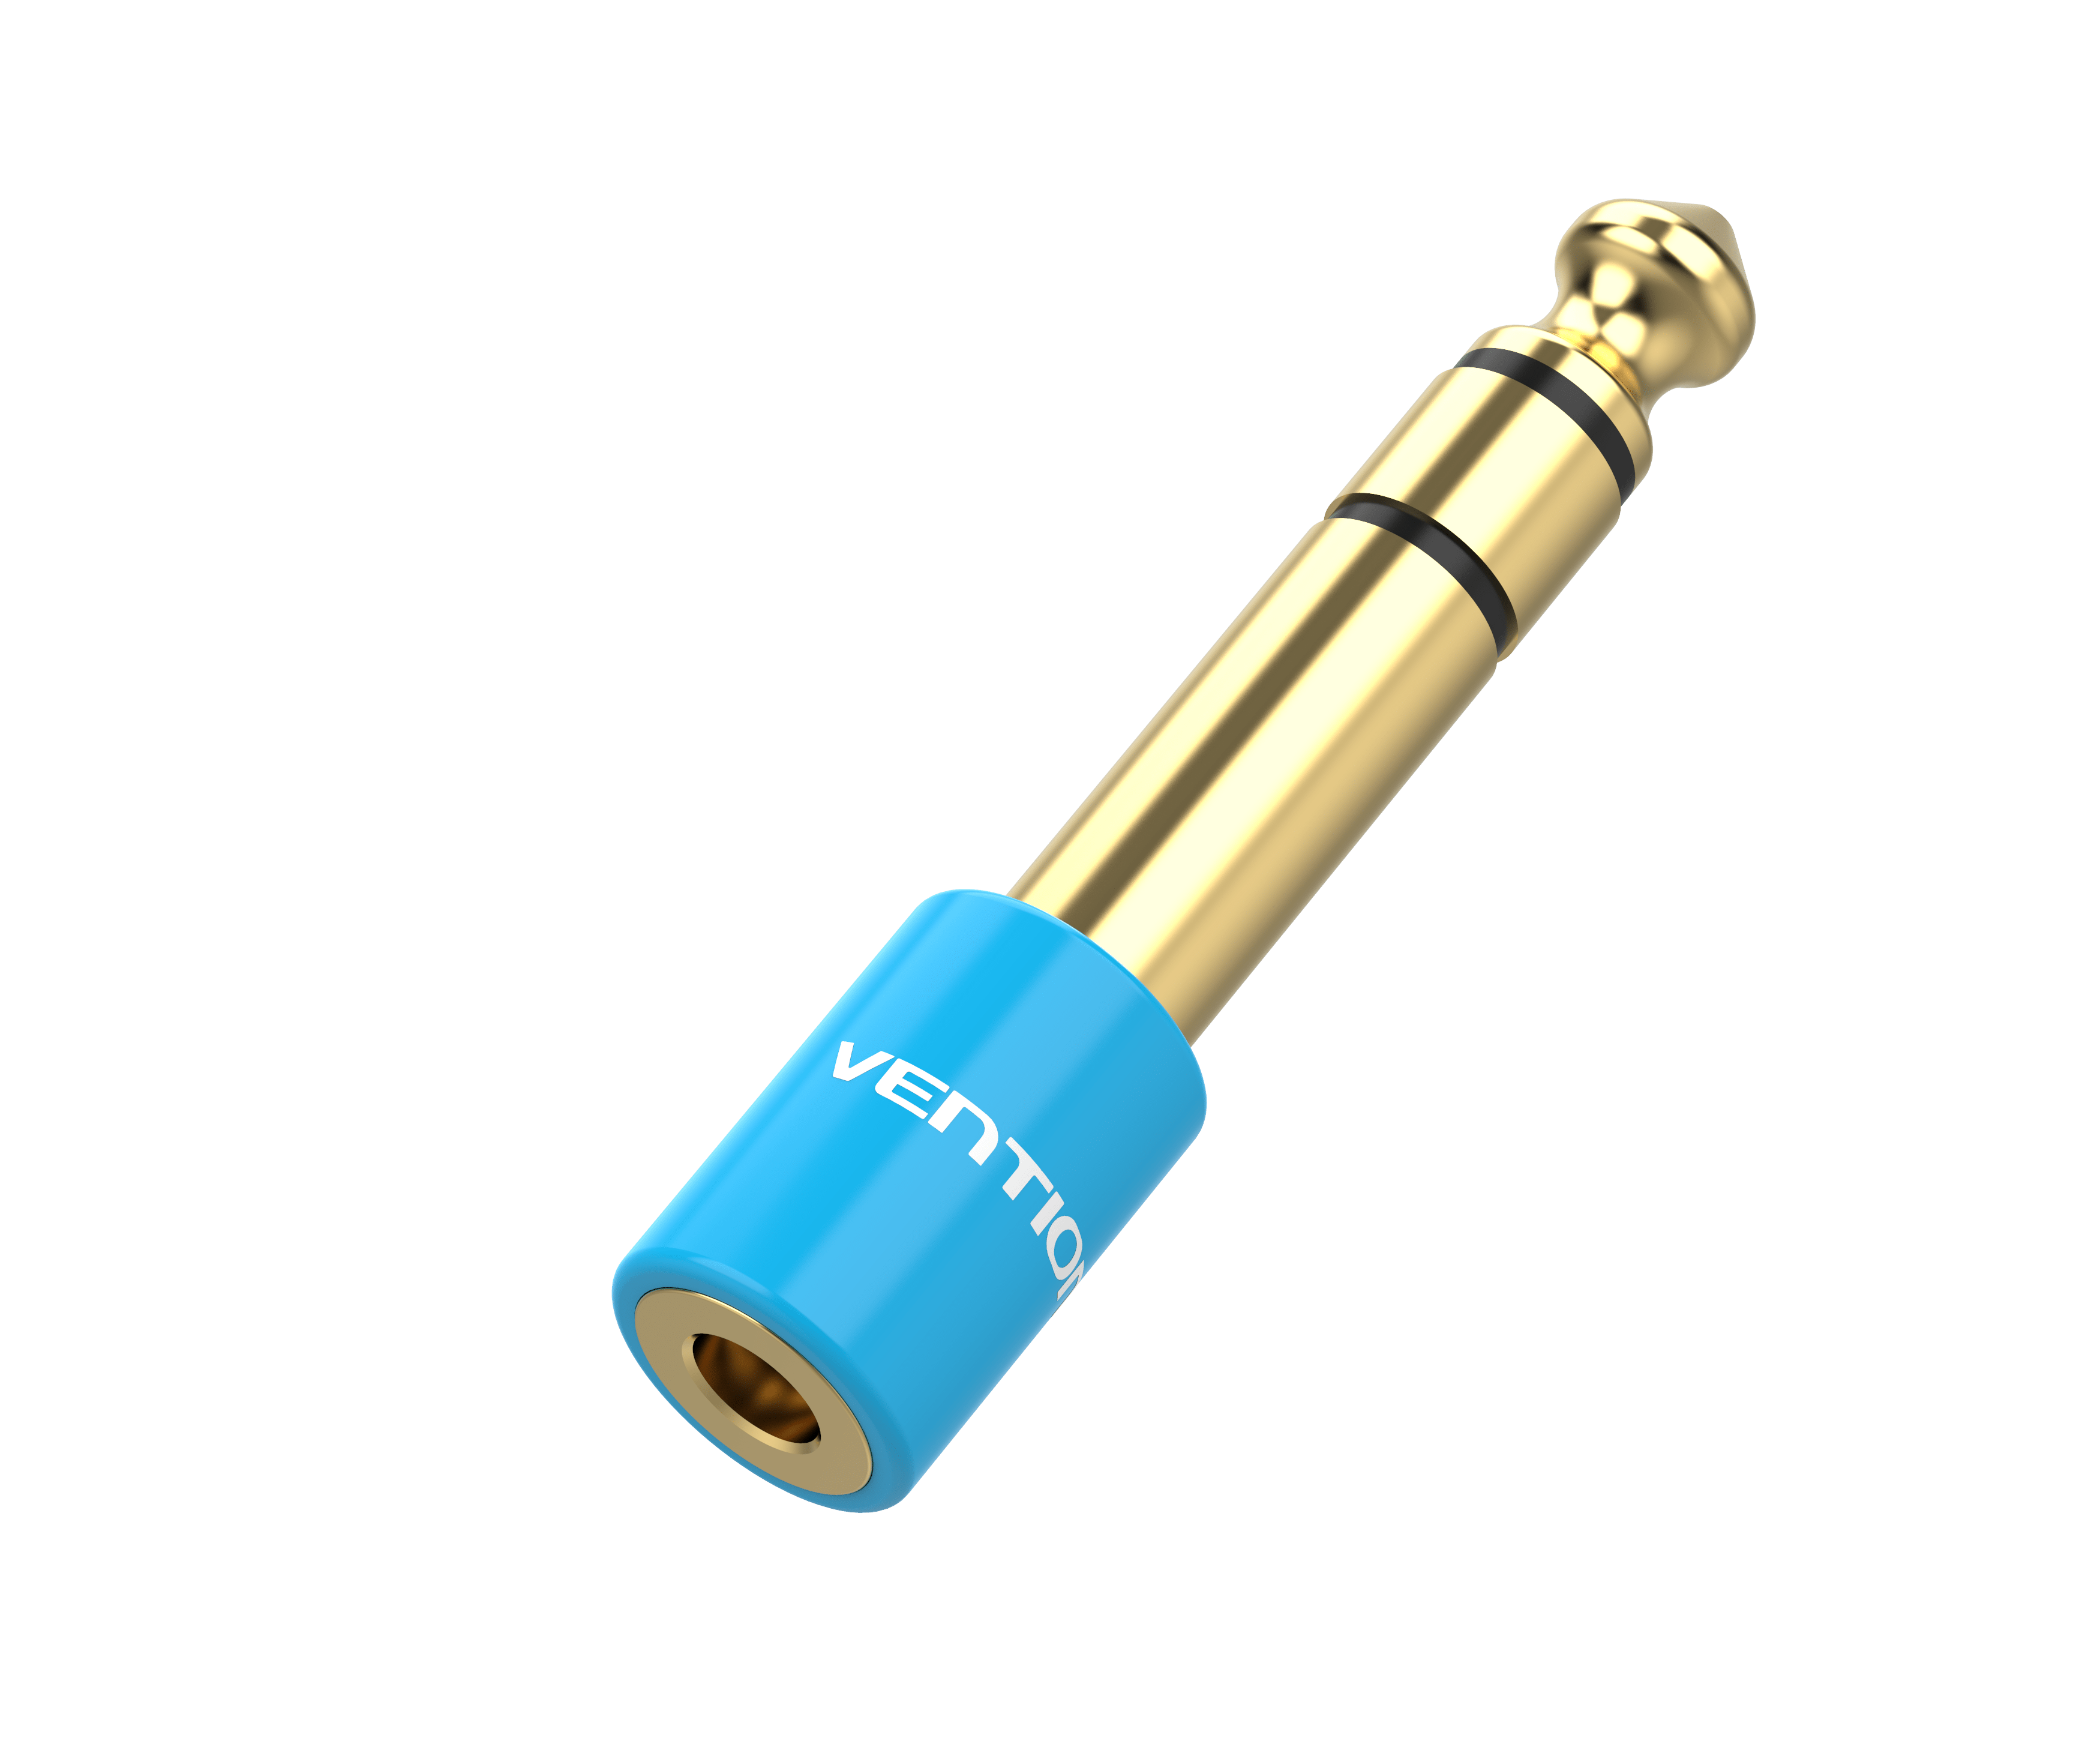 VENTION 6.5mm Male to 3.5mm Female Audio Adapter